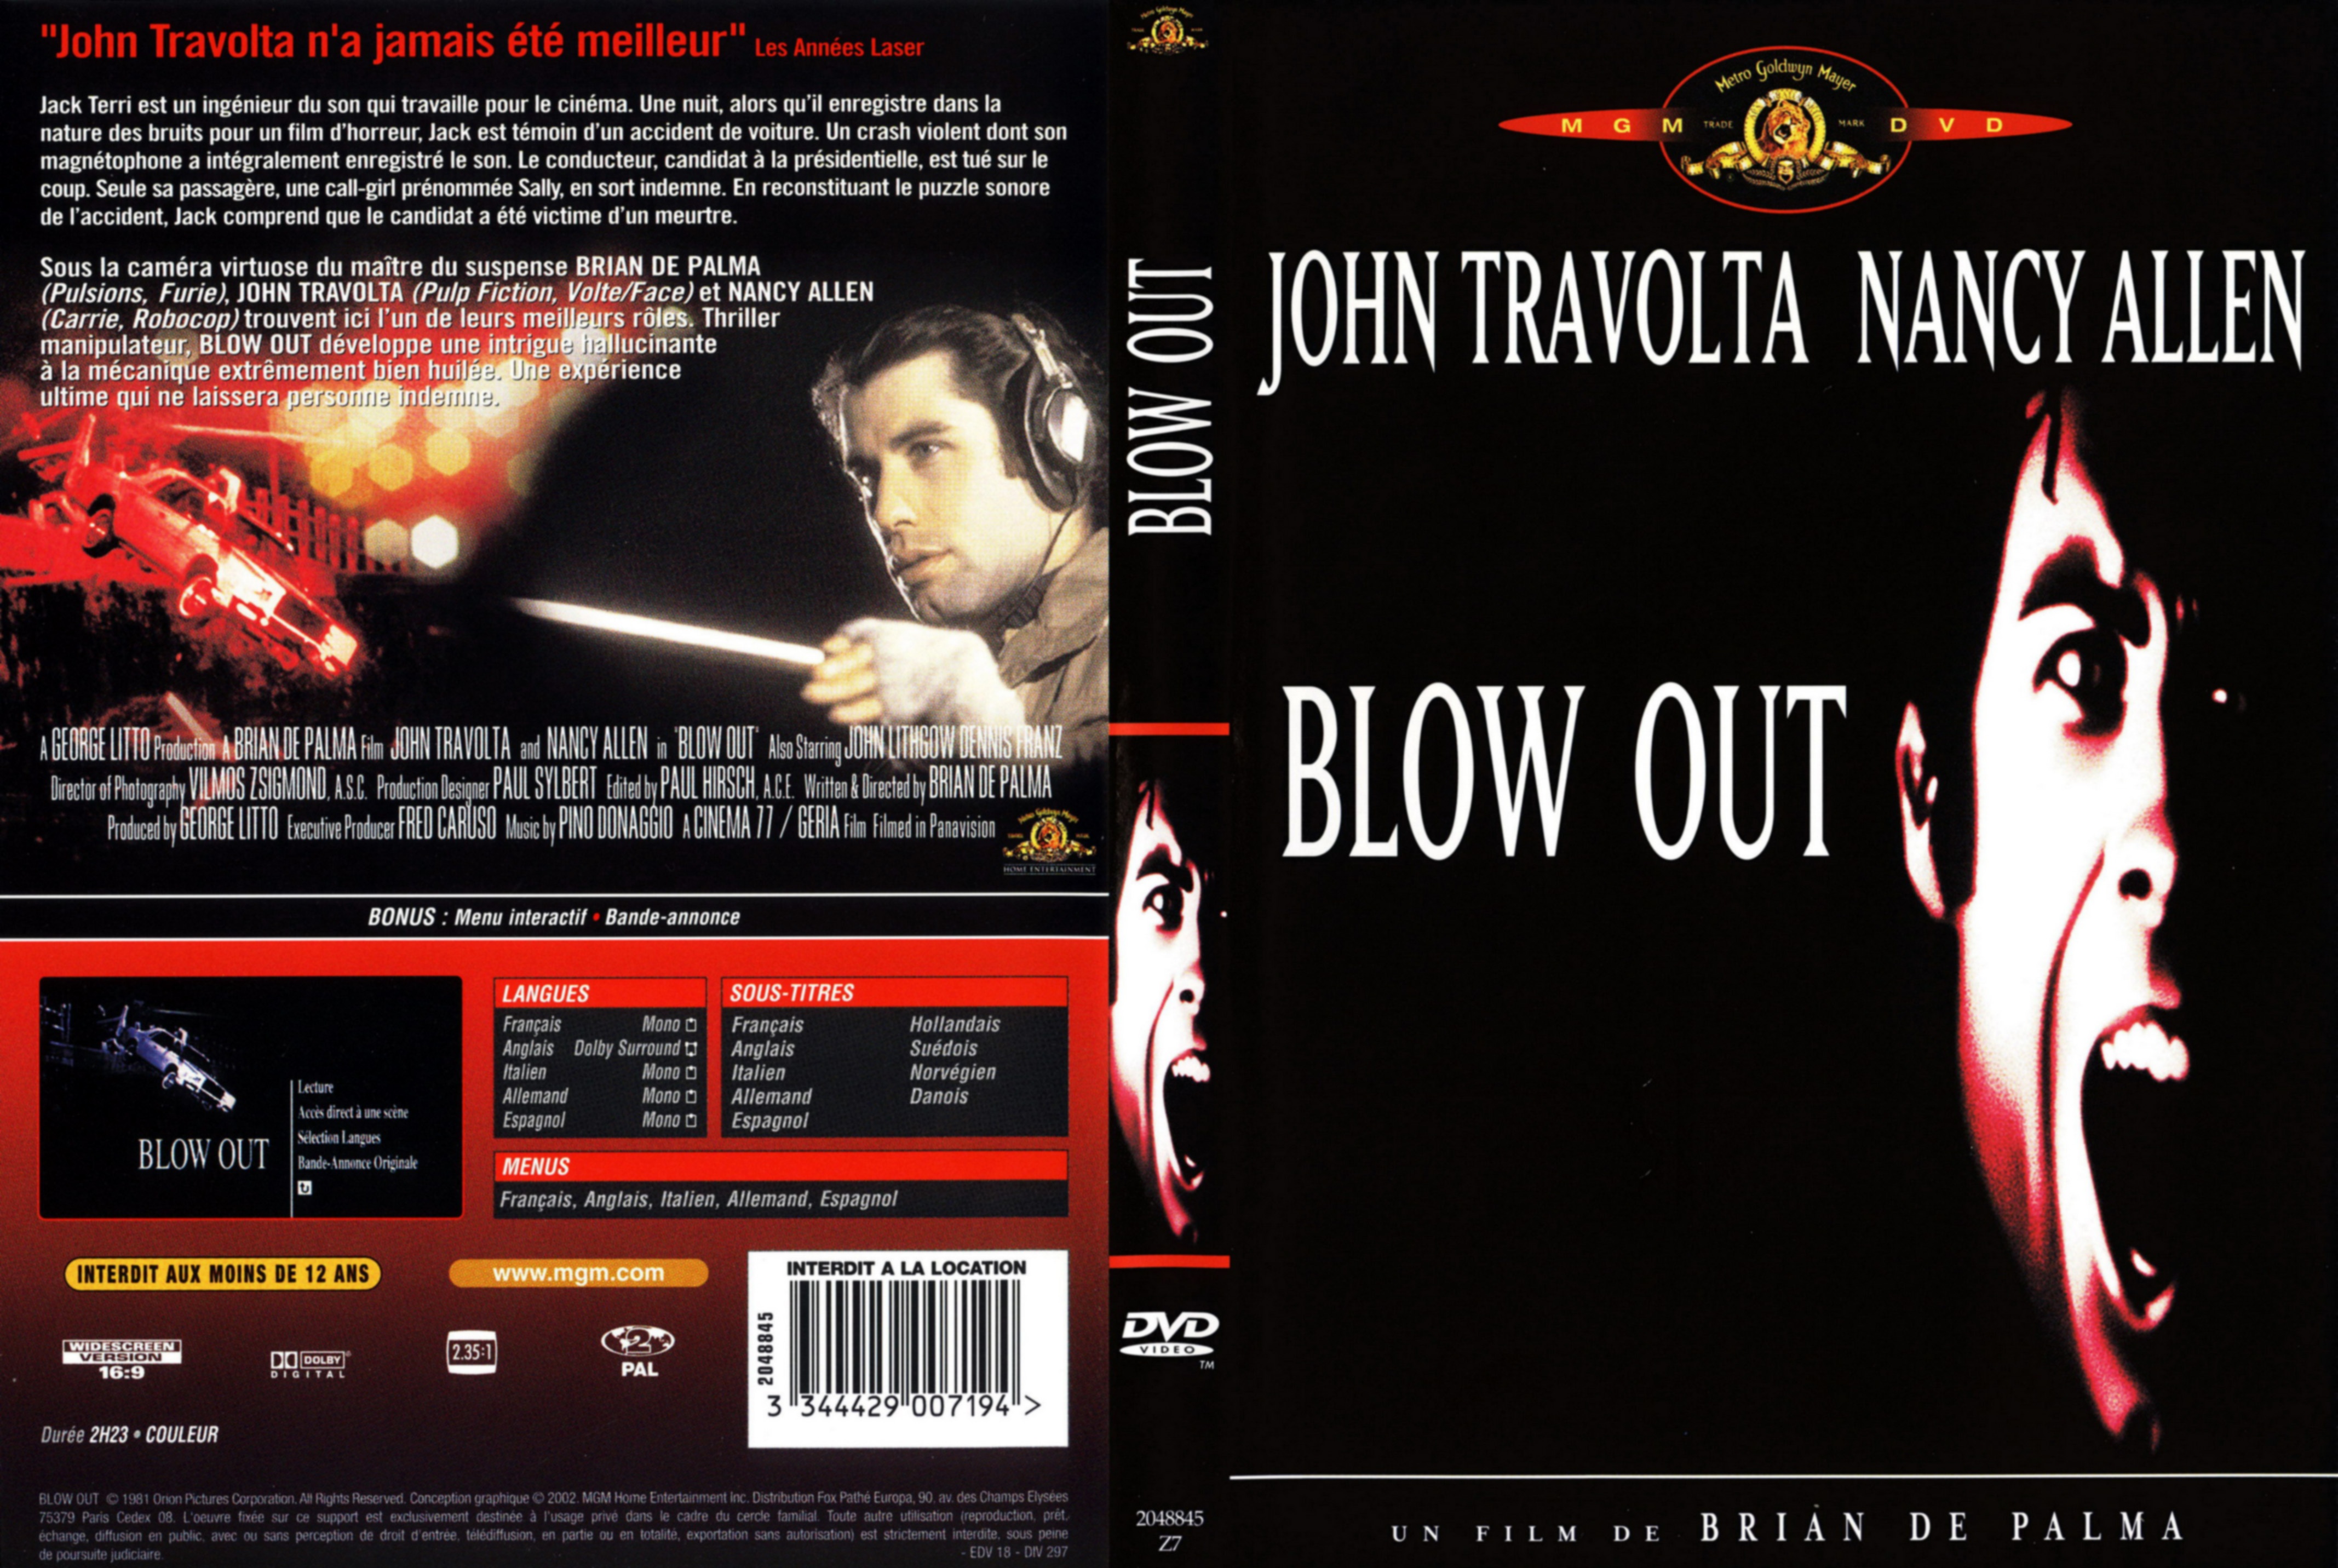 Jaquette DVD Blow out